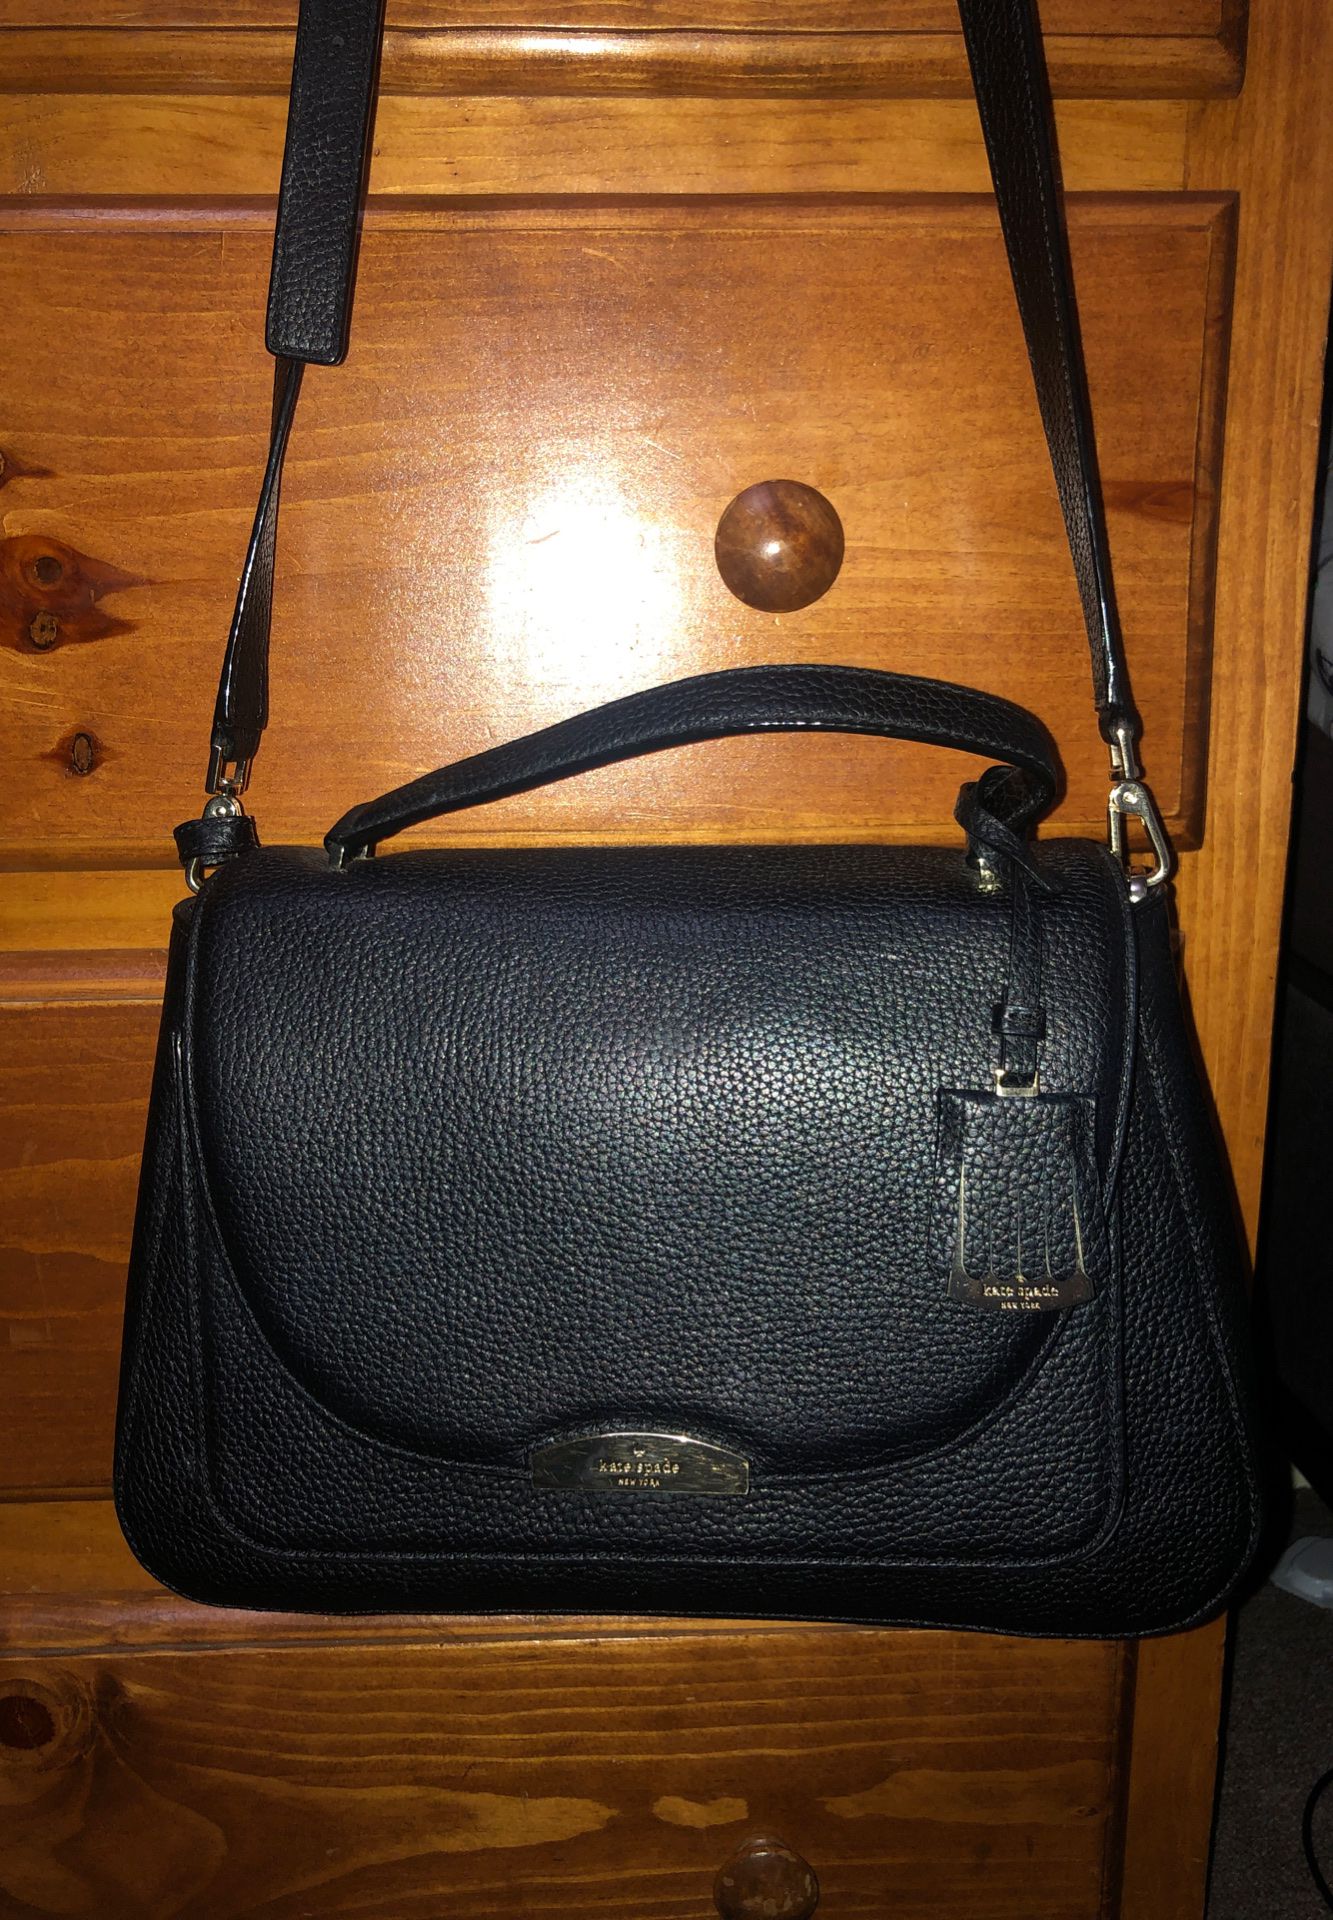 Black Kate Spade purse and wallet